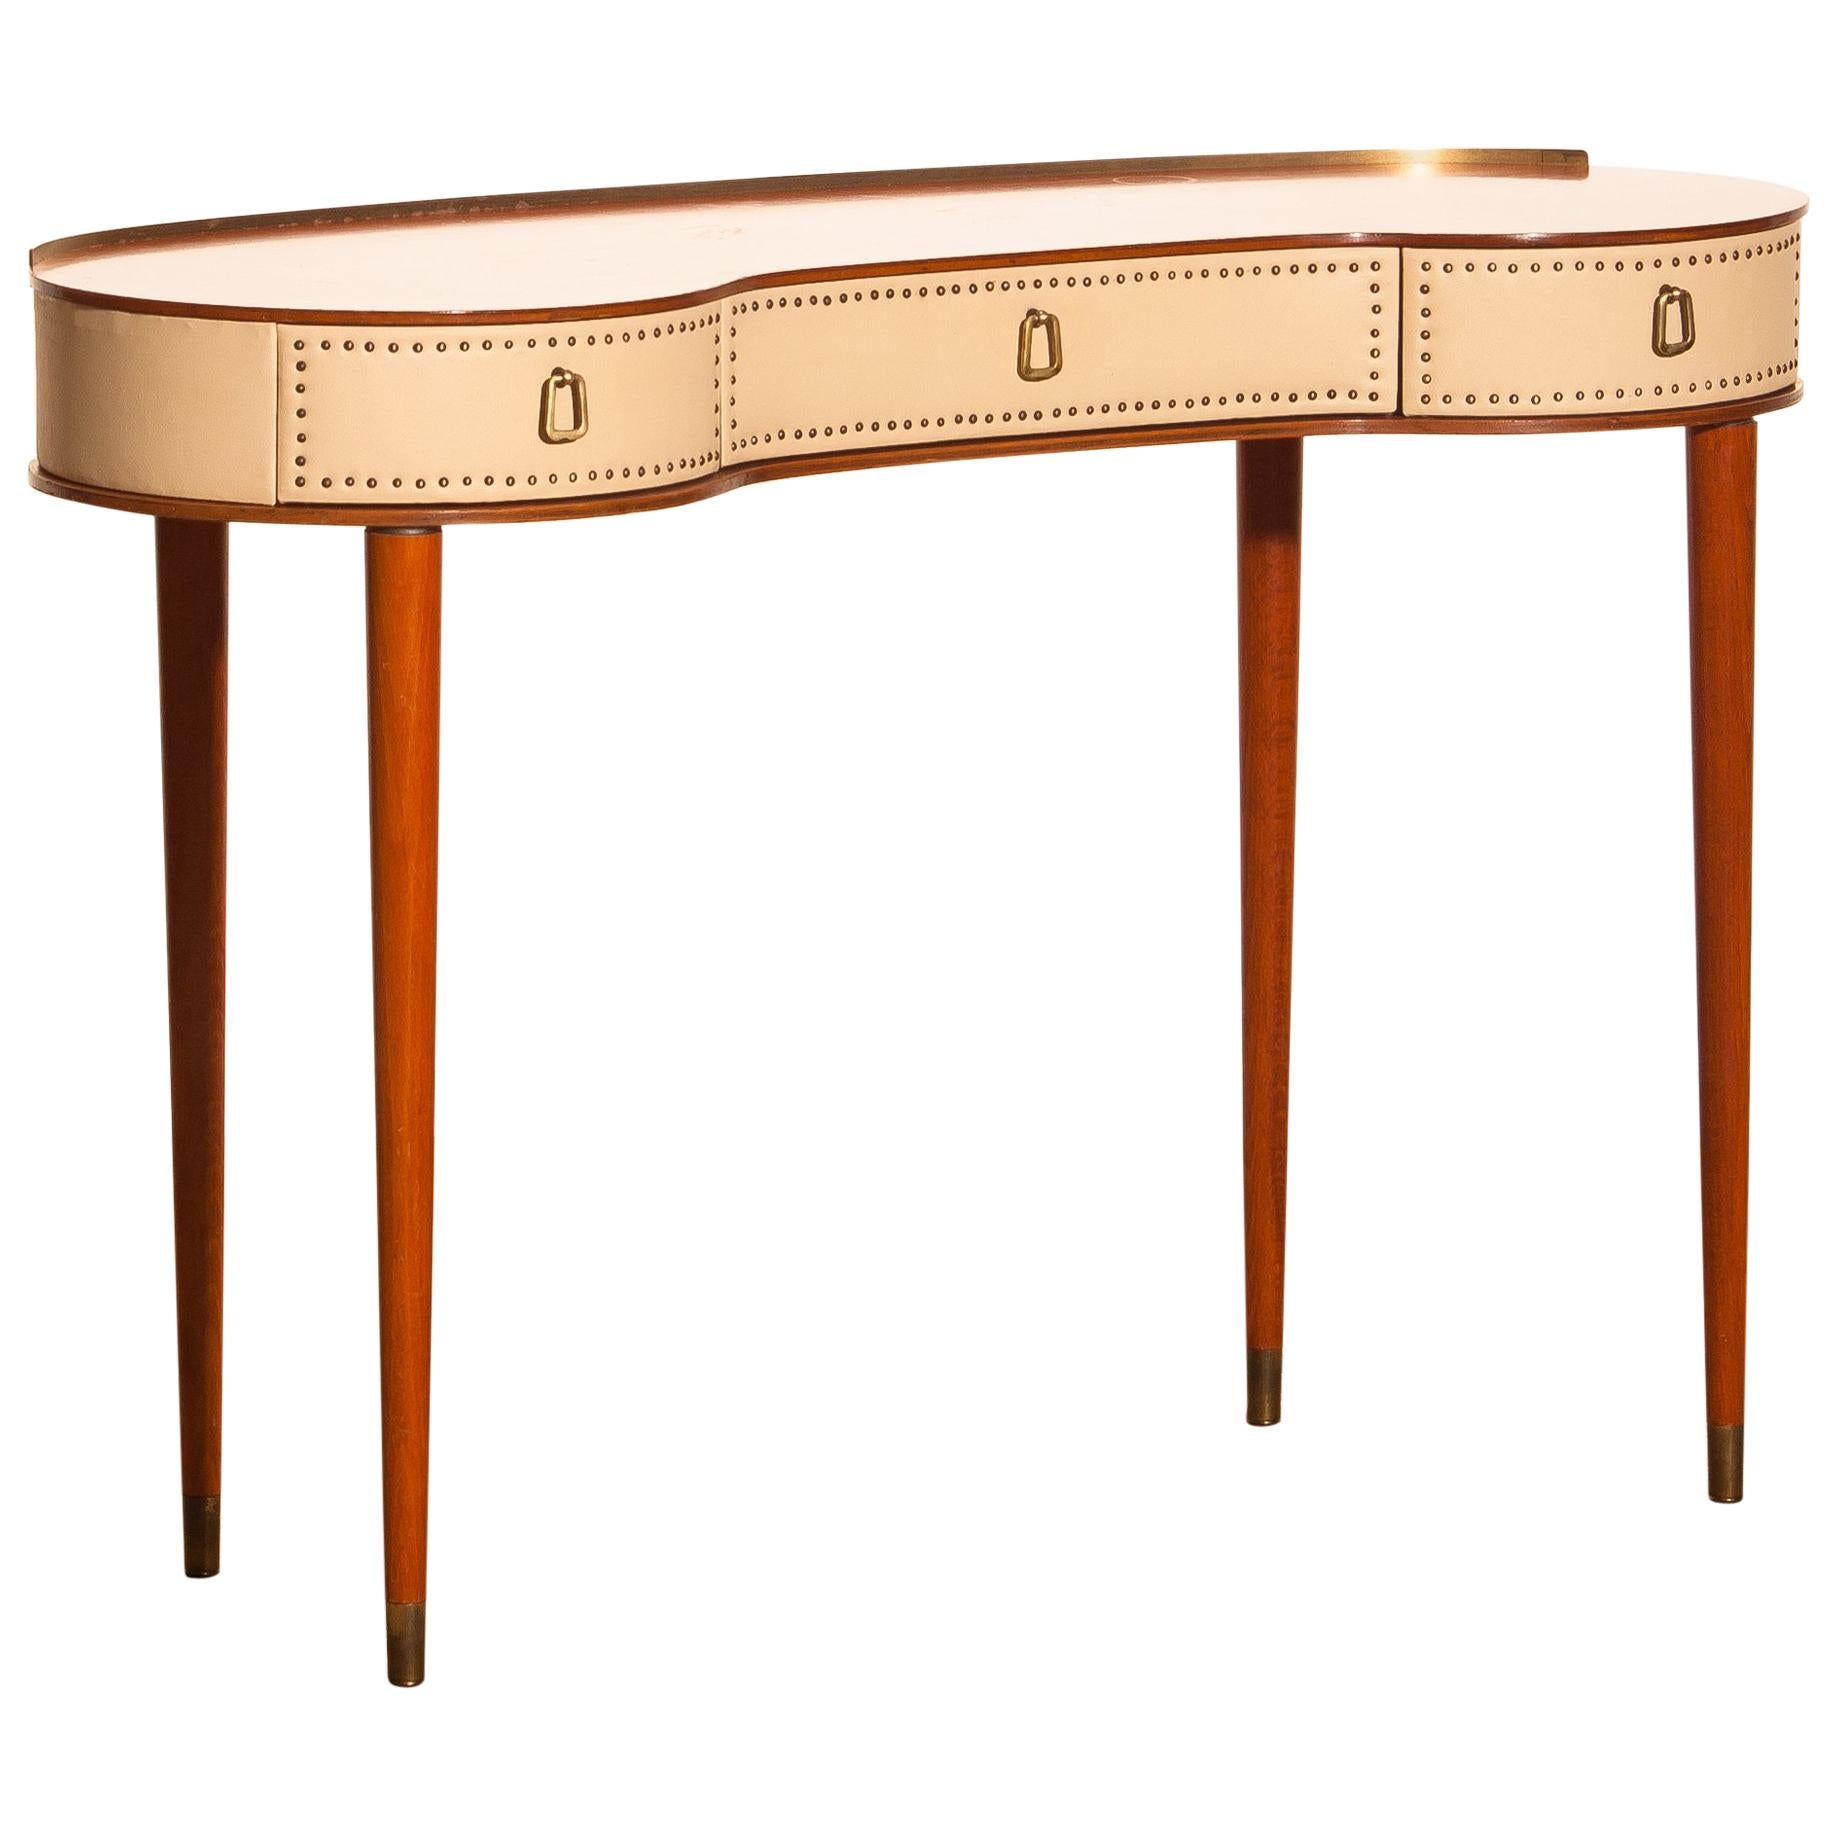 Mahogany Vanity or Dressing Table by Halvdan Pettersson for Tibro, Sweden, 1950s